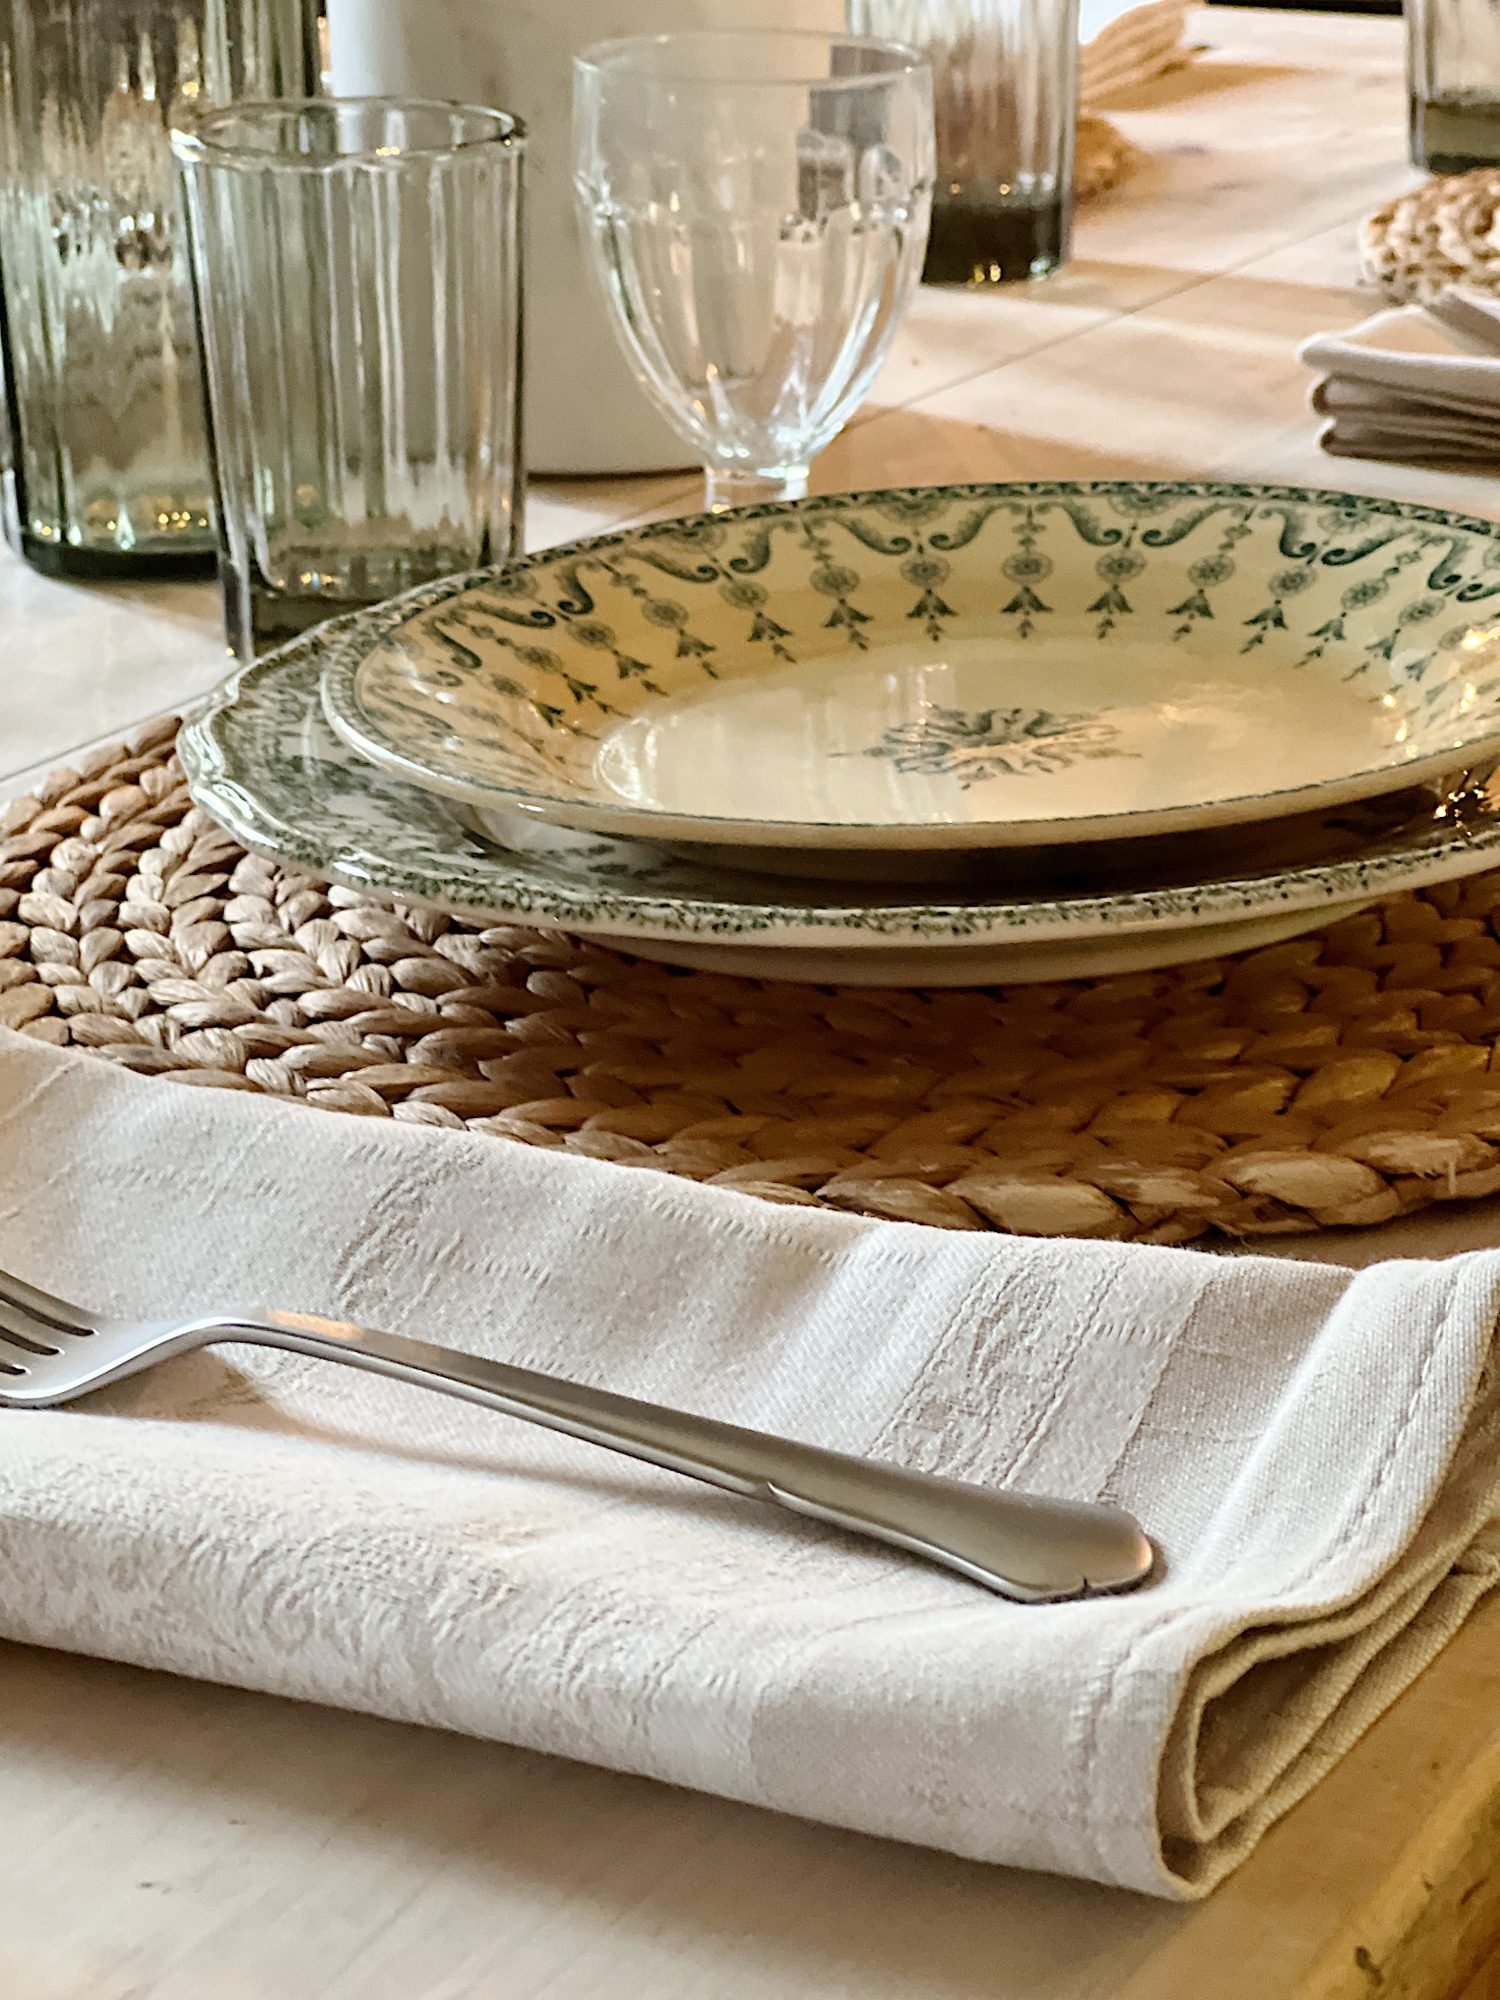 French Ironstone Plates and Napkins.